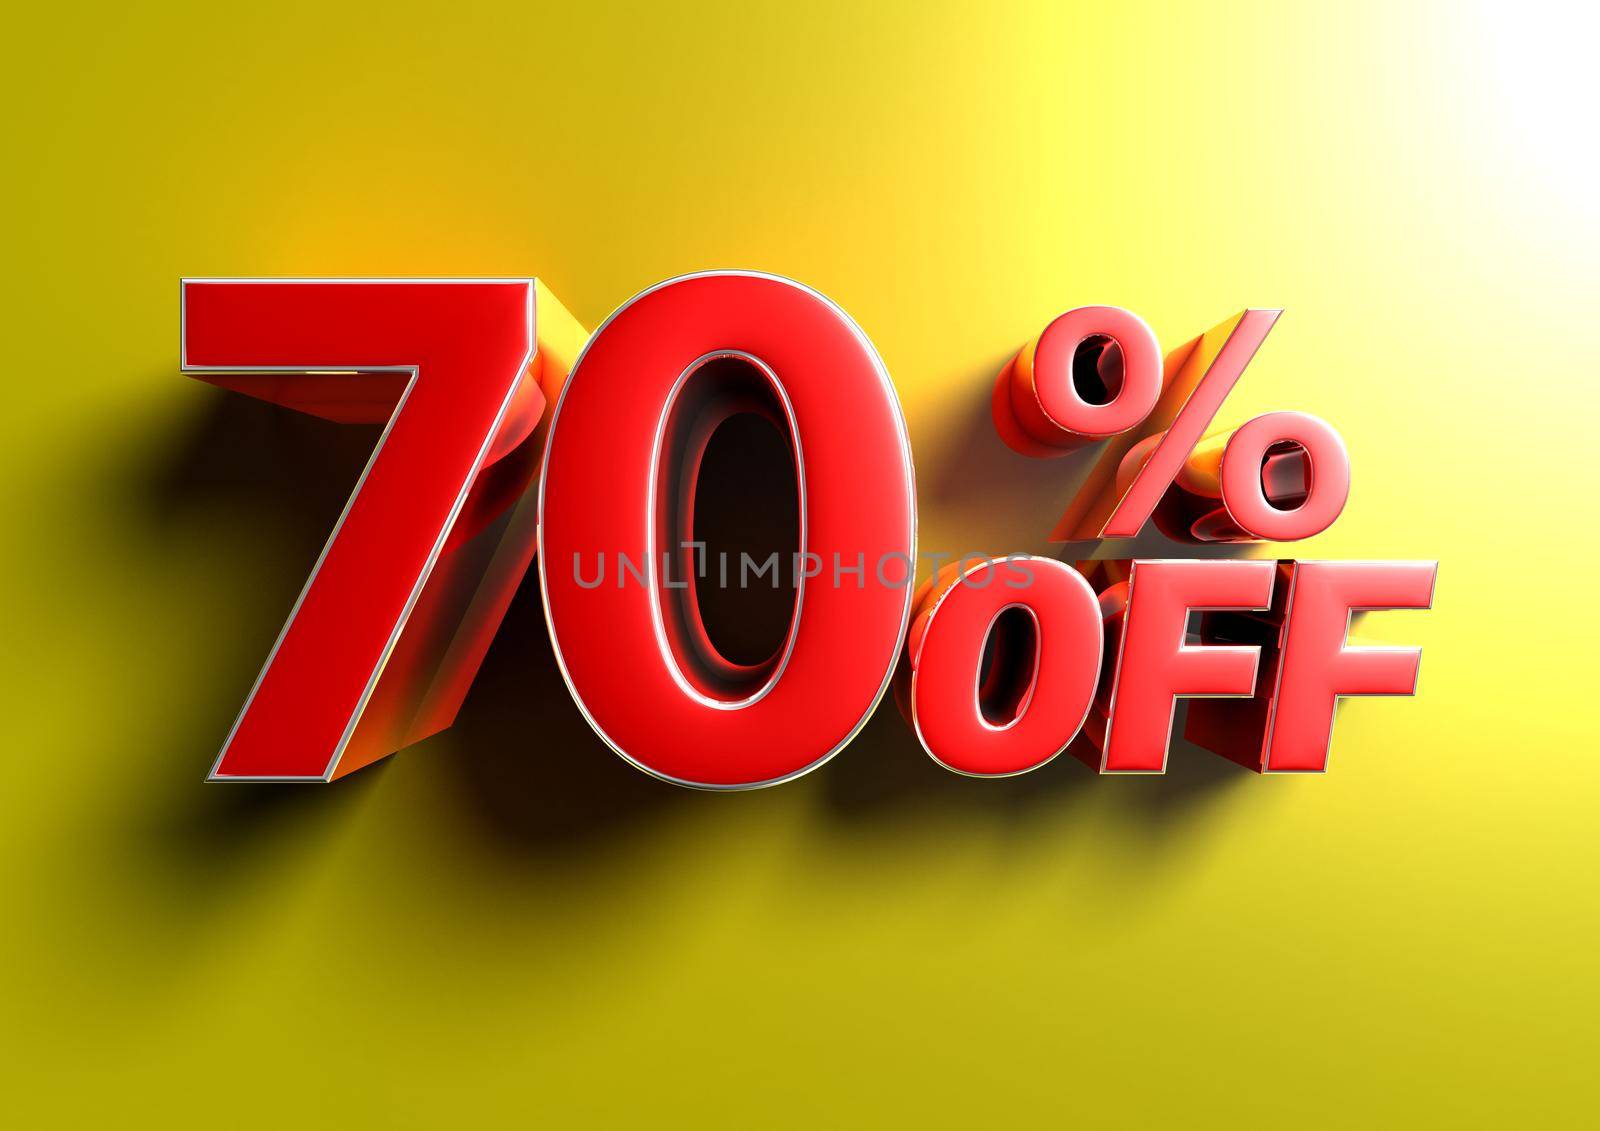 70 Percent off 3d illustration Sign on yellow background.